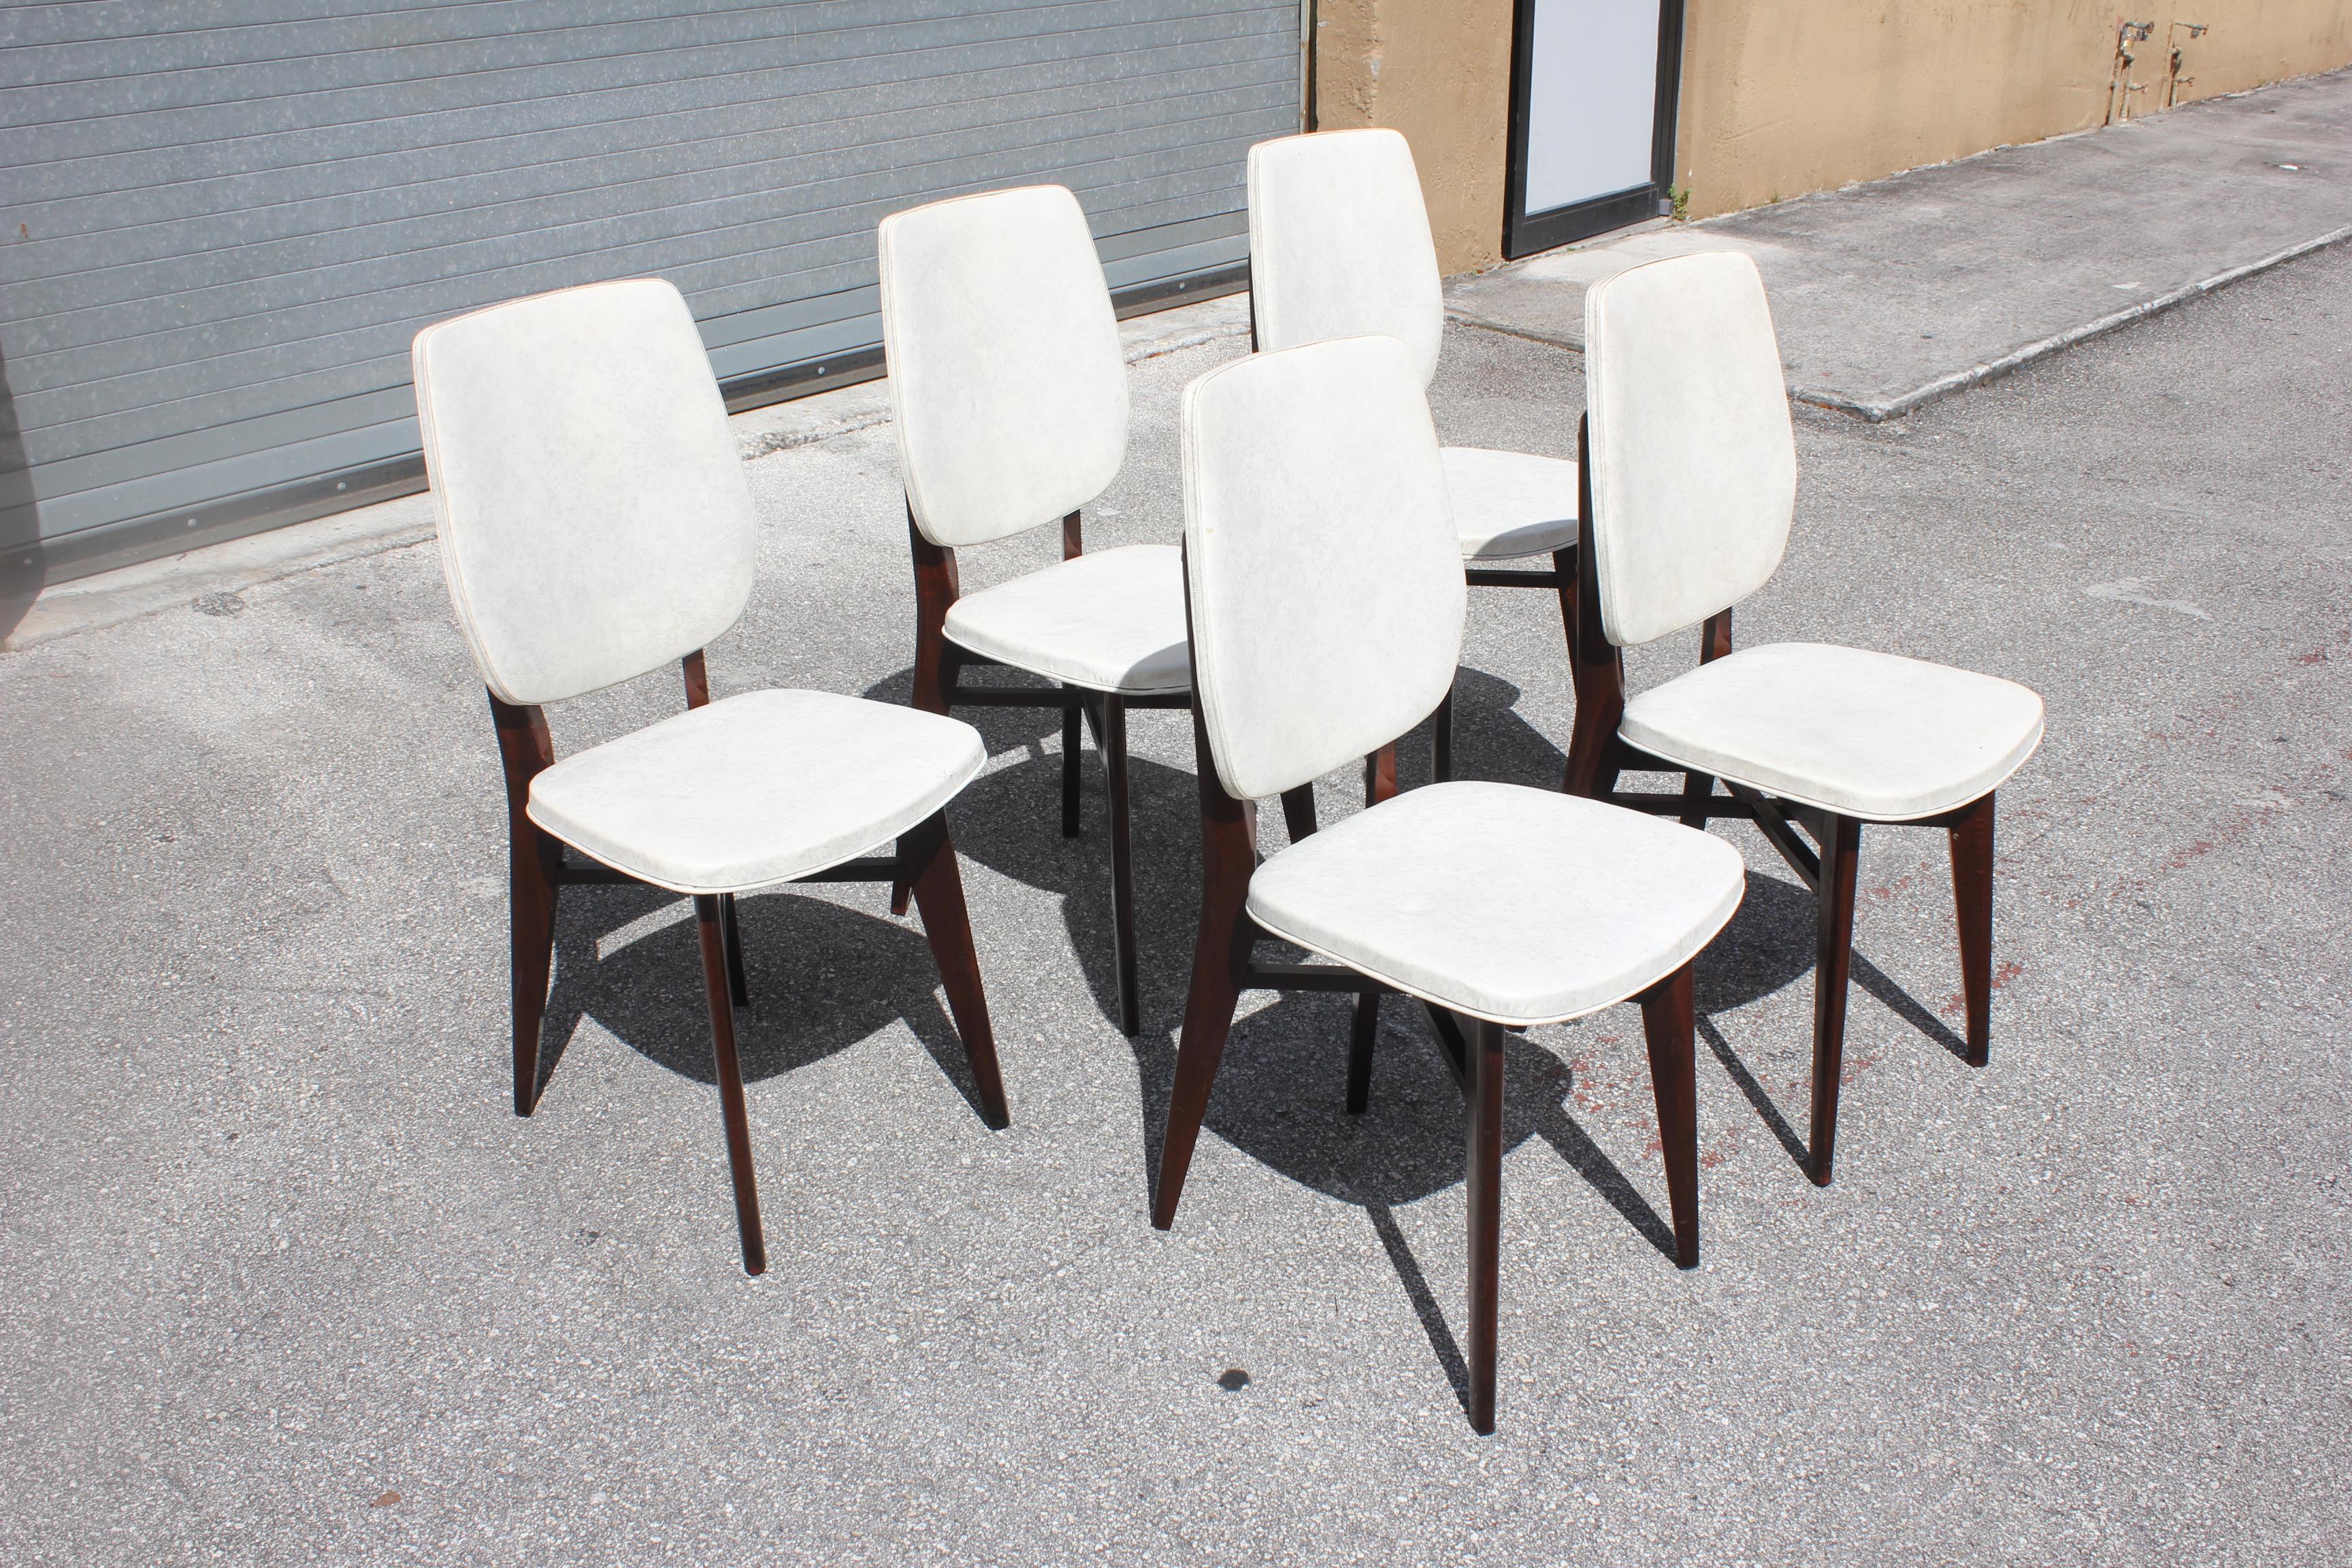 A set of 5 French Art Deco solid mahogany dining chairs. The chair frames are in excellent condition. But the (Reupholstery is vinyl recommended for all 5 dining chairs).